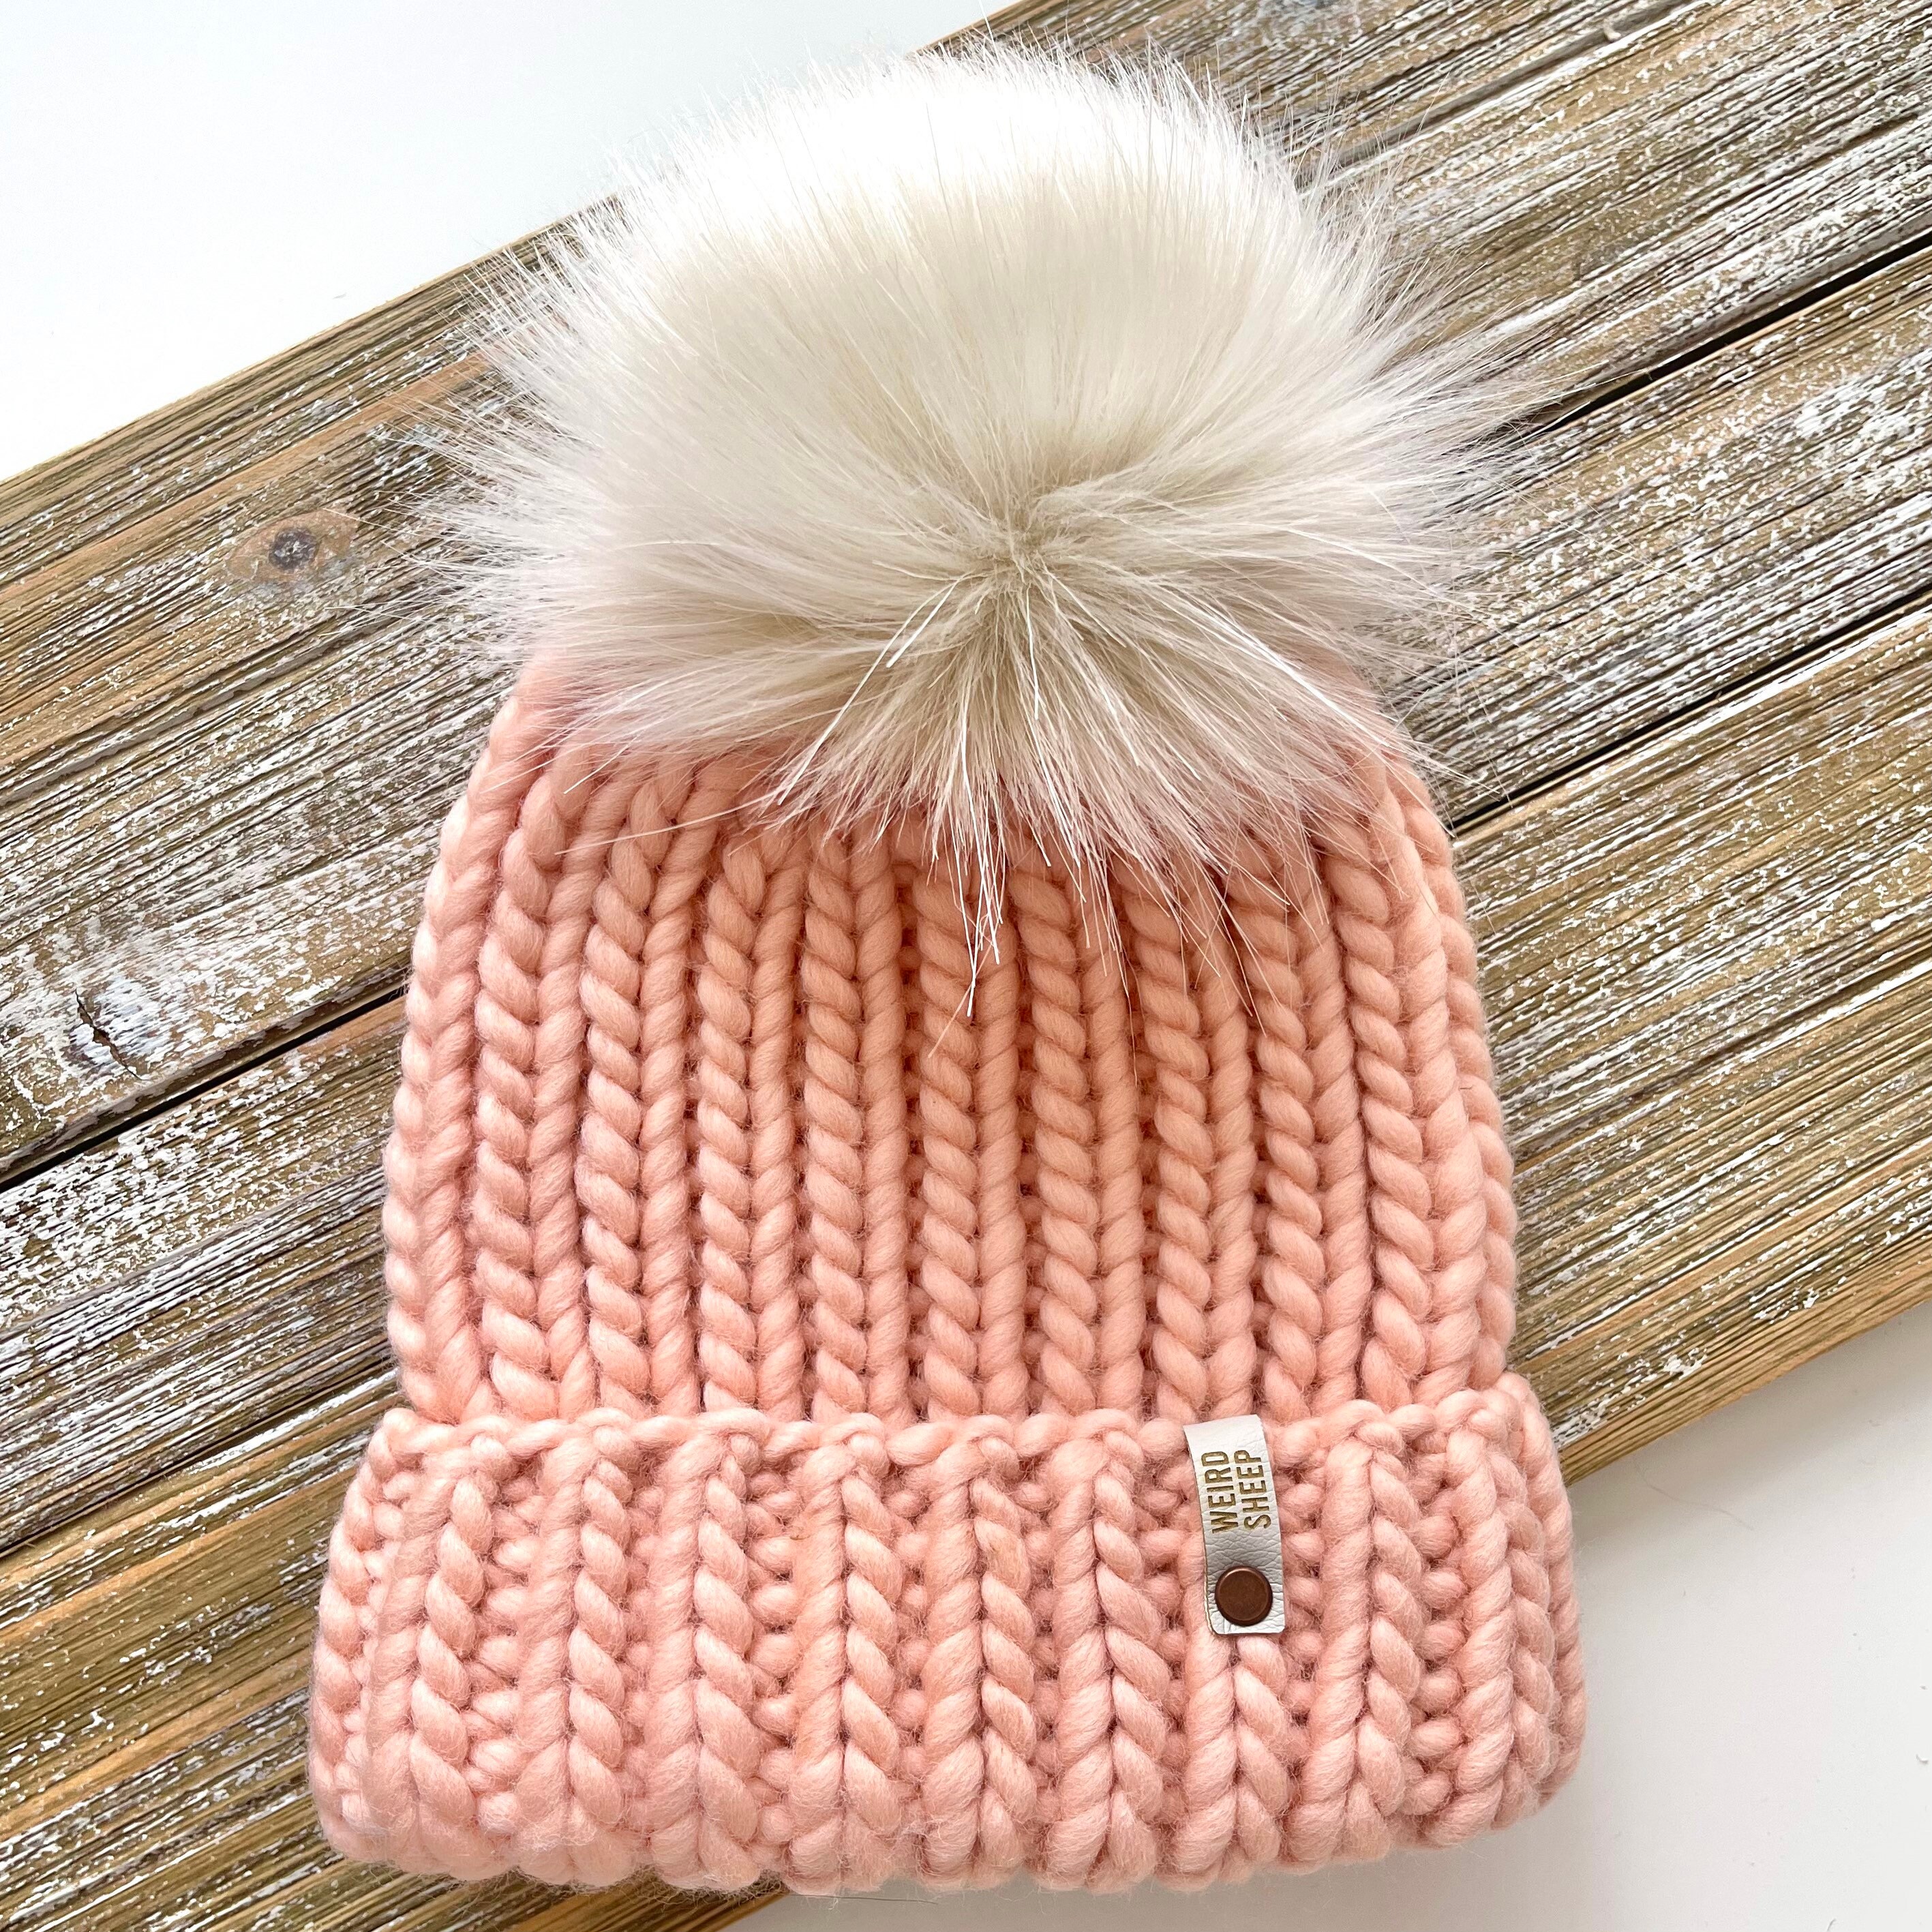 Luxe Knit Beanie with Faux Fur Pom-Pom Fair Isle Adult and Child Ready To Ship Knit Hat Mommy and Me Set Malabrigo Merino Wool